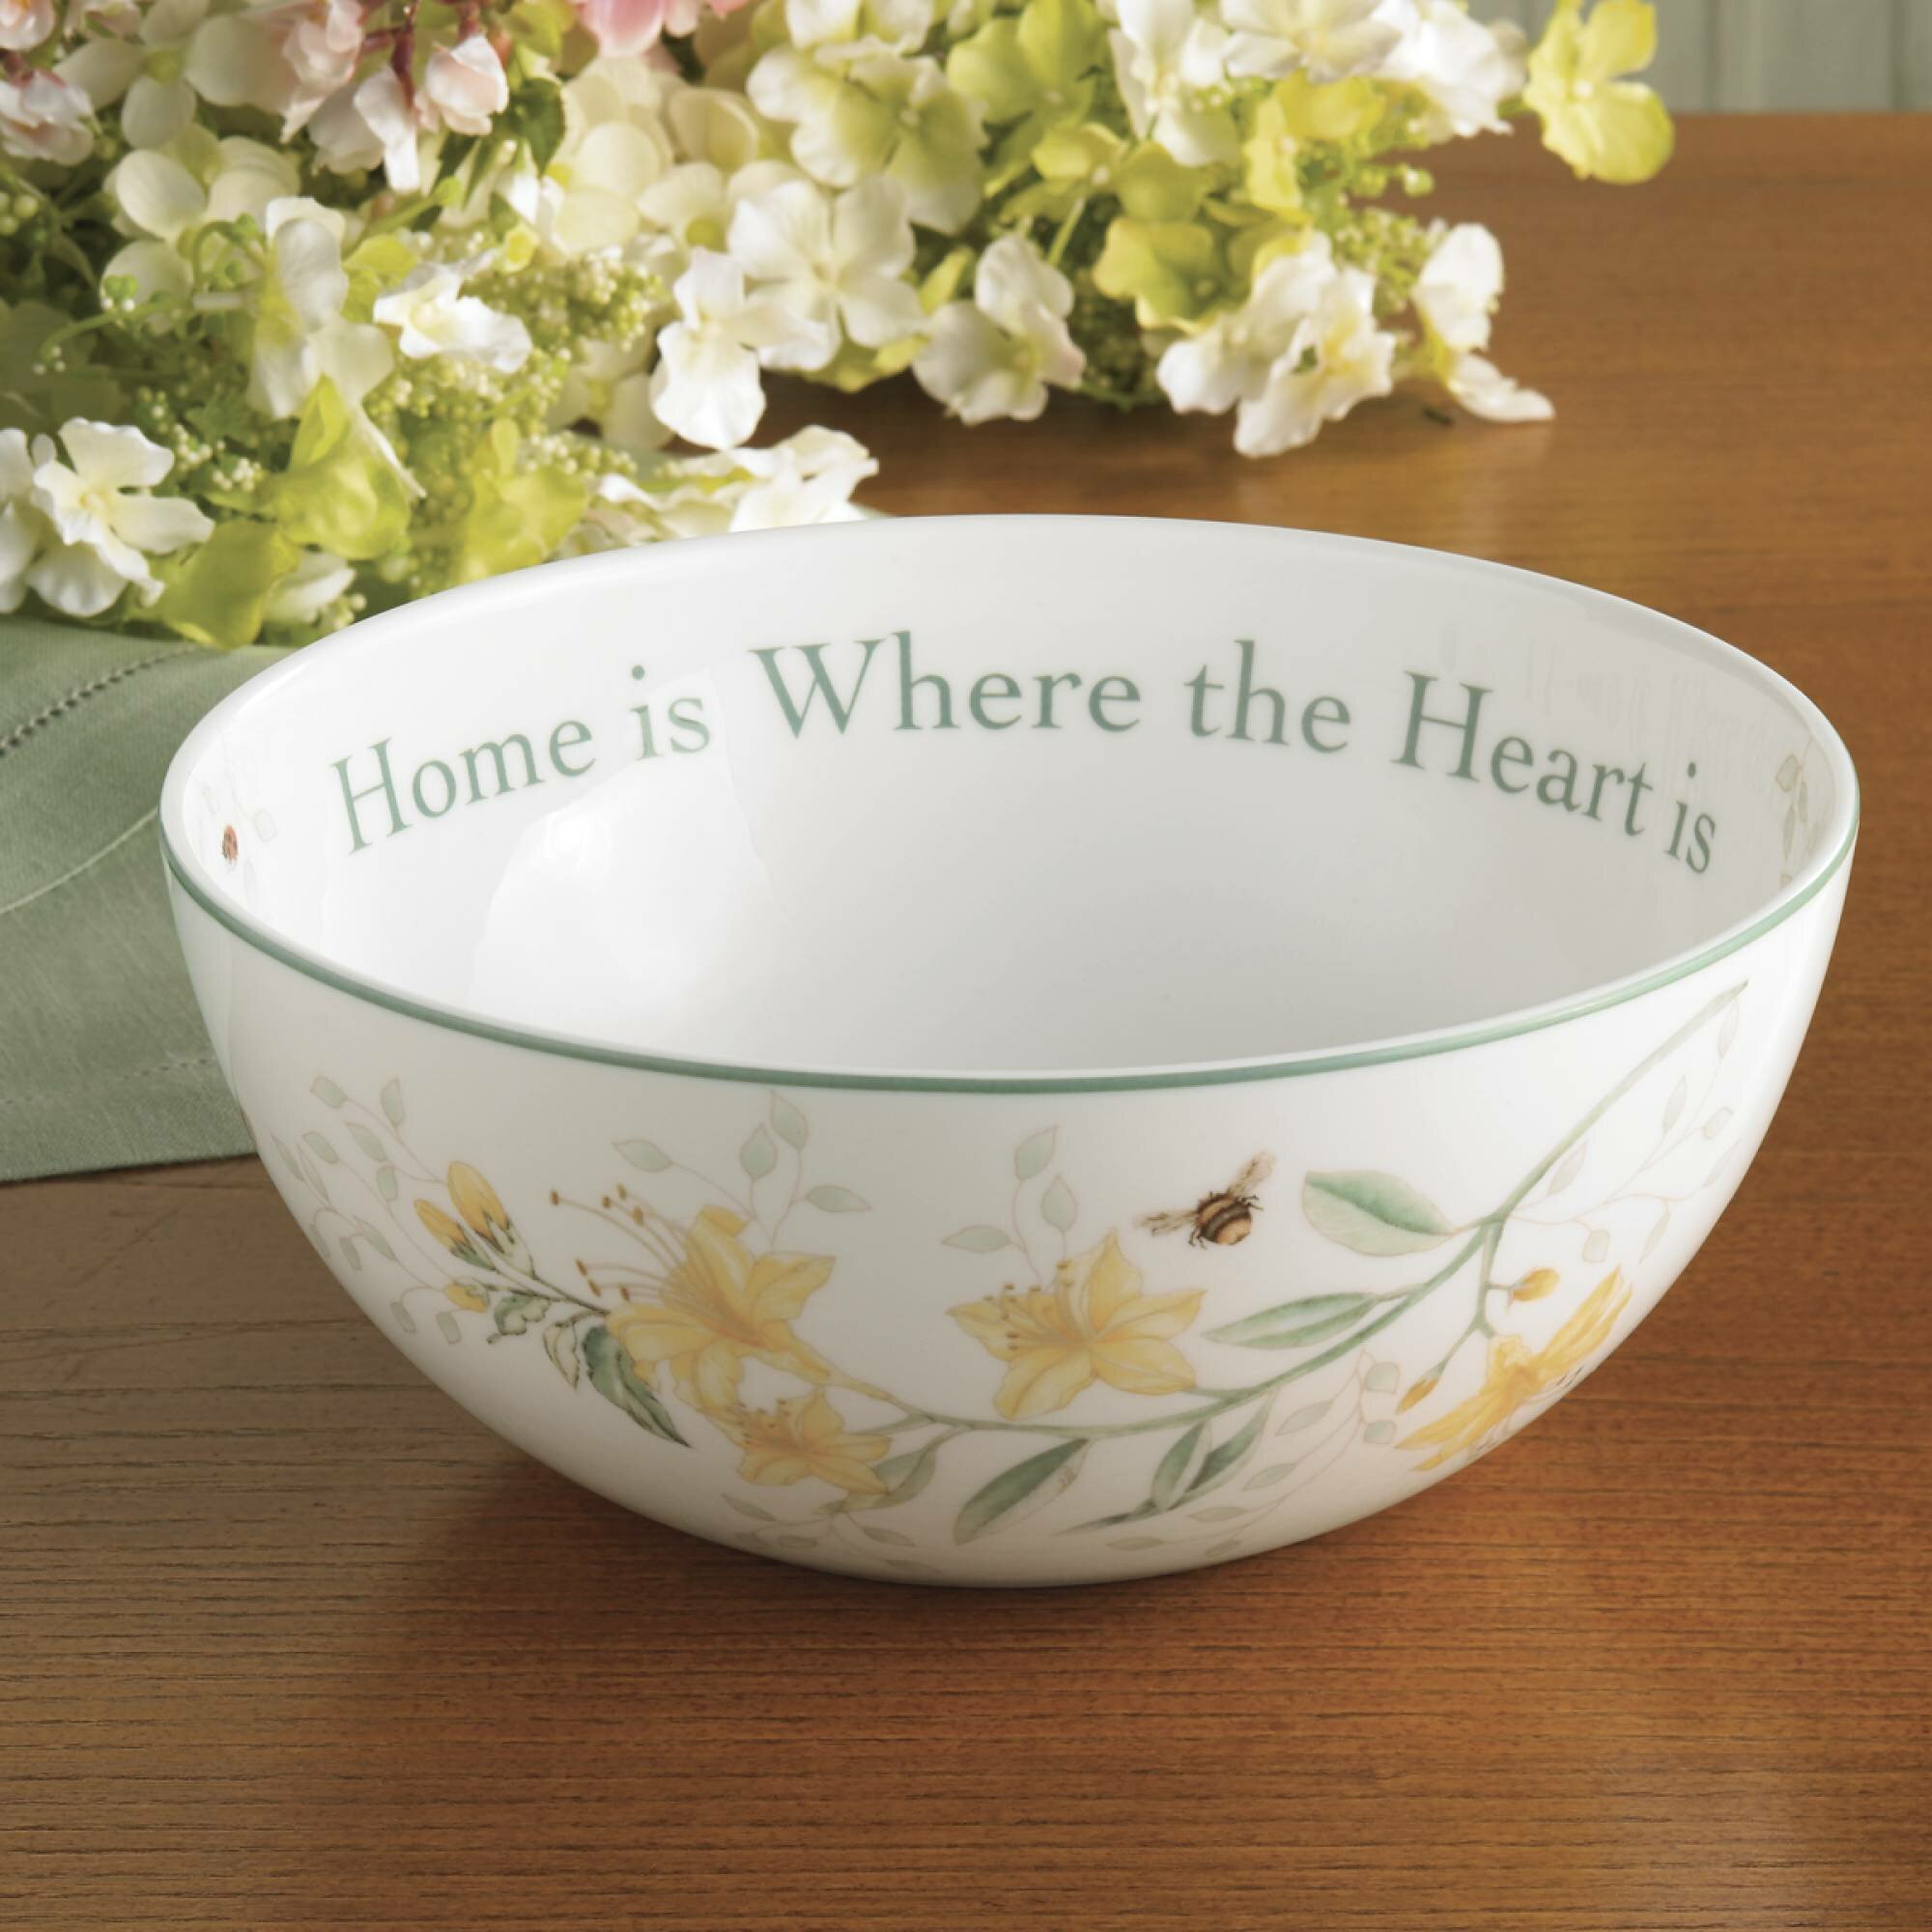 Lenox Butterfly Meadow Home Is Where The Heart Is Serving Bowl